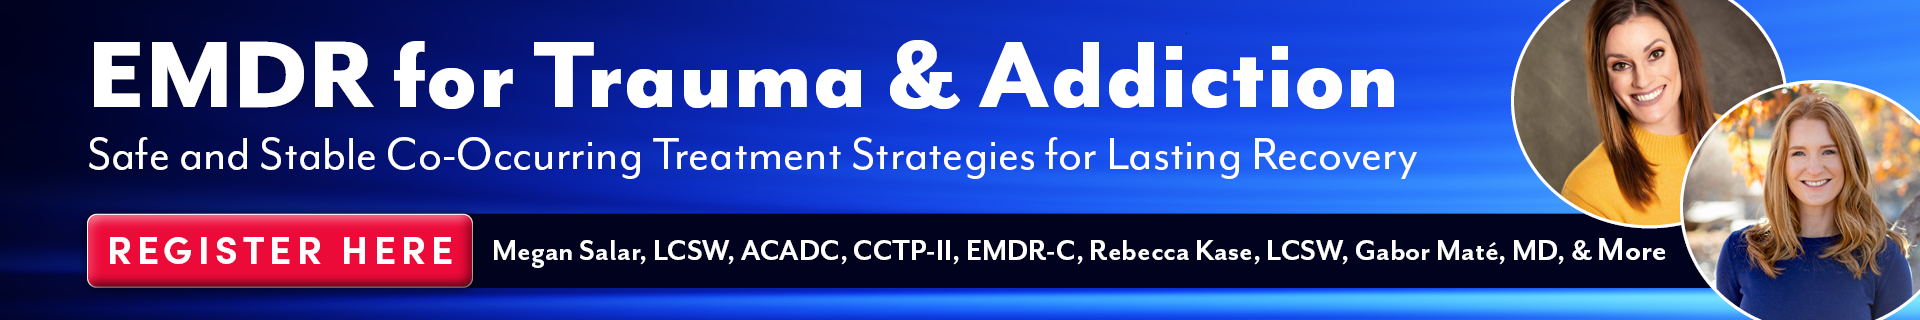 EMDR for Trauma & Addiction: Safe and Stable Co-Occurring Treatment Strategies for Lasting Recovery